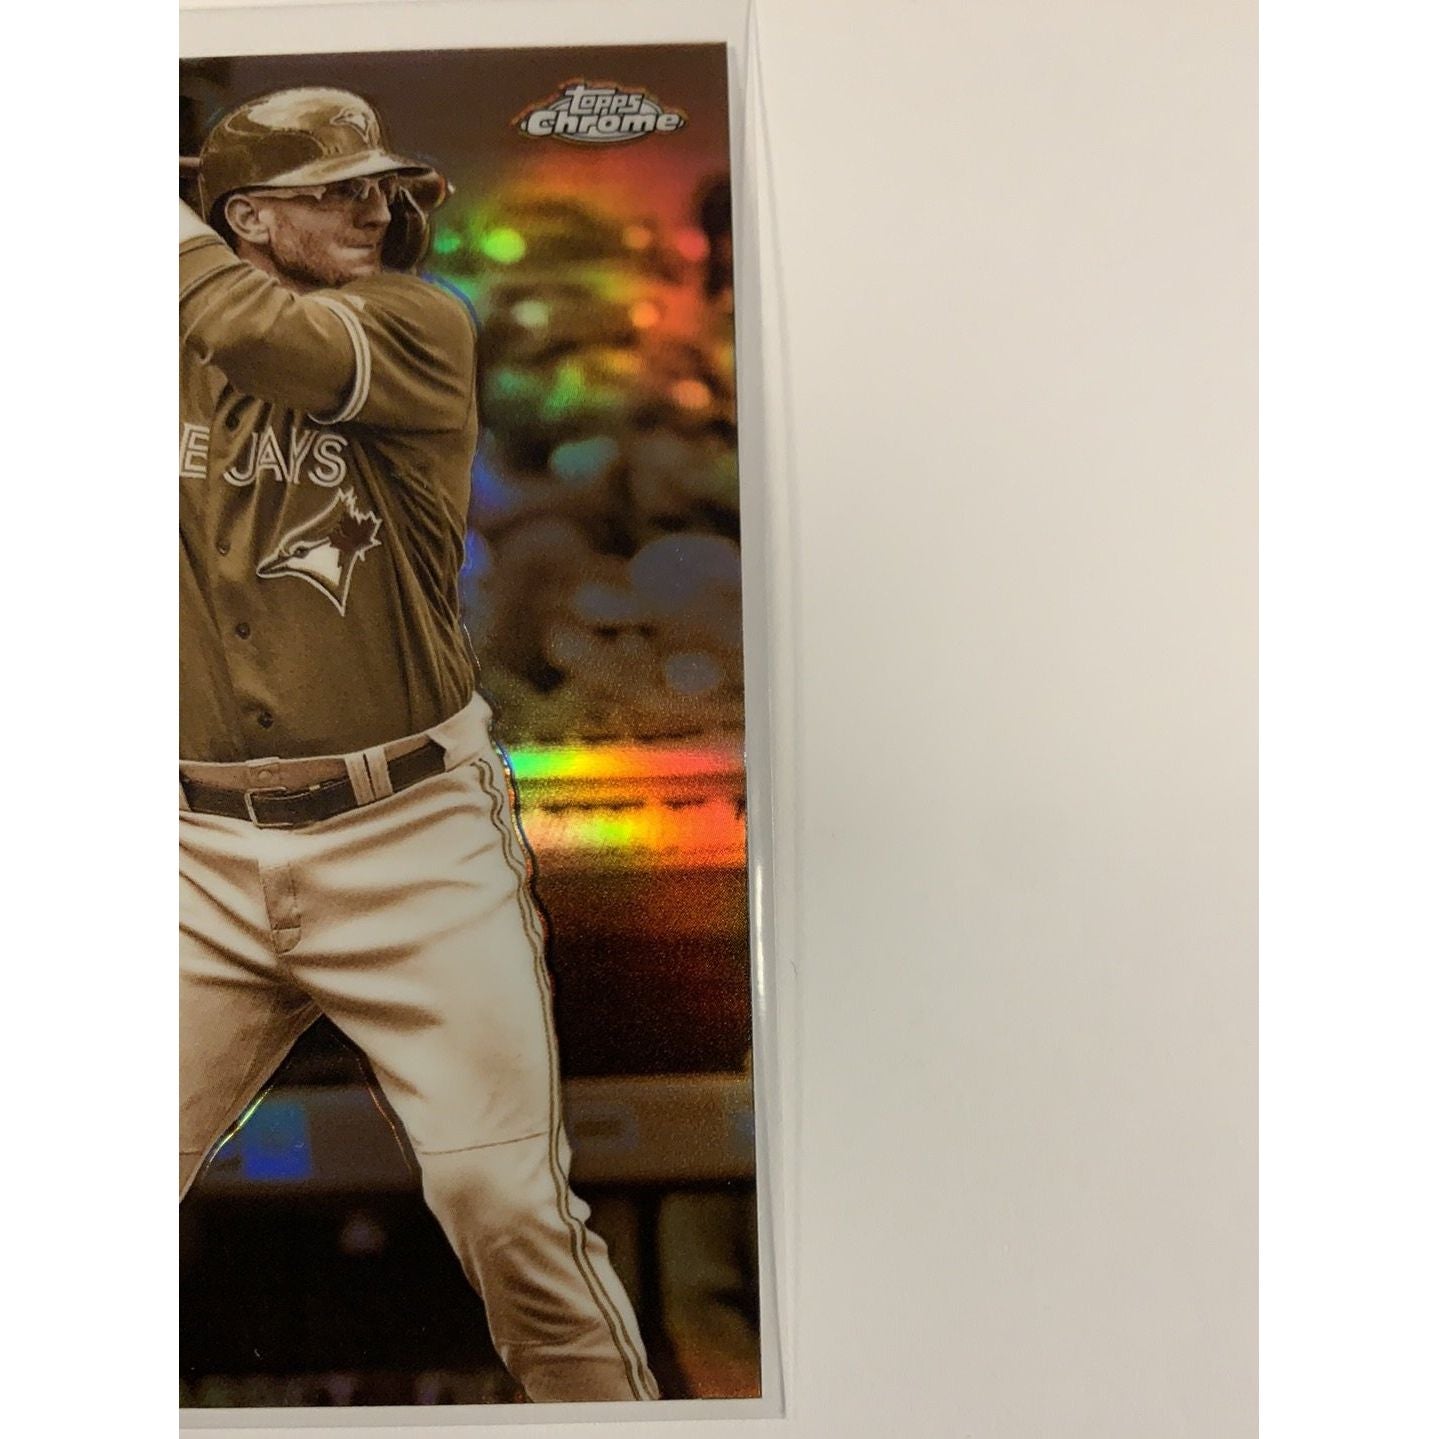  2020 Topps Chrome Danny Jansen Sepia Refractor  Local Legends Cards & Collectibles